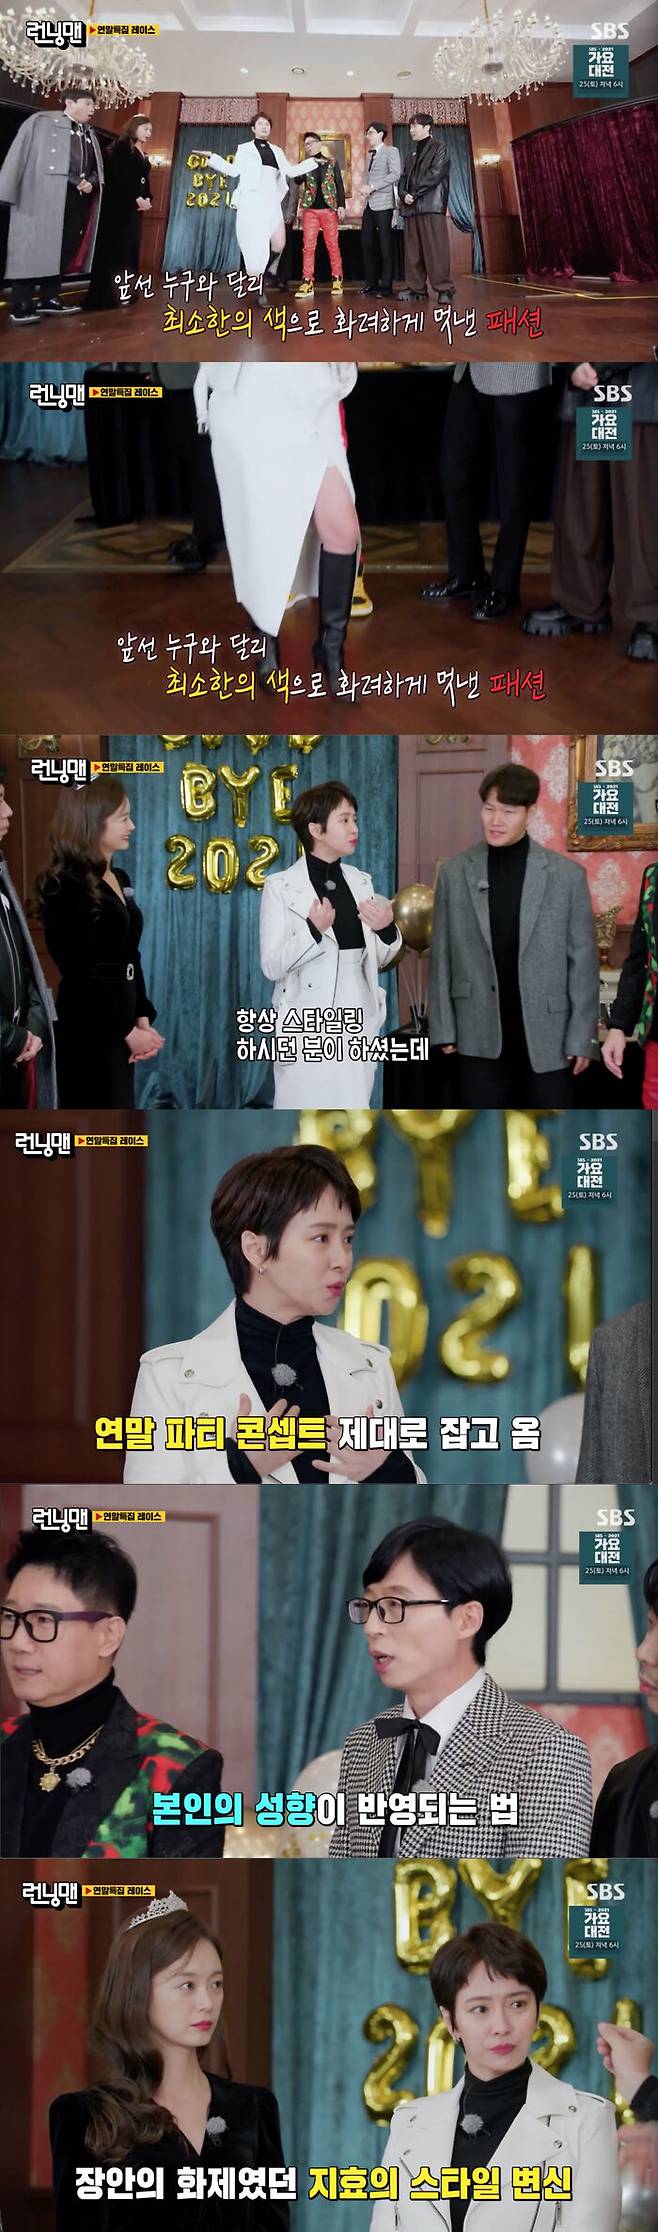 Song Ji-hyo has begun to explain to calm his angry fan.On SBS Running Man broadcasted on the 19th, the year-end special race was held.On the show, Yoo Jae-Suk mentioned Song Ji-hyos fashion, so other colleagues praised Song Ji-hyos style, saying, Its so beautiful today, its cool.Song Ji-hyo said, I always styled it, but I made it up to the concept today. He made a statement that seemed to be conscious of the controversial styling controversy.Yoo Jae-Suk explained that Song Ji-hyos costume reflects his tendency, saying, Stylists also suffer, but their tendency is reflected.Kim Jong-guk also revealed, Our stylists are not because they do not work, because I only wear what I want to wear and say that I do not work.Song Ji-hyo also attracted attention by showing his hairstyle as he is growing up soon and trying to calm his concerns.